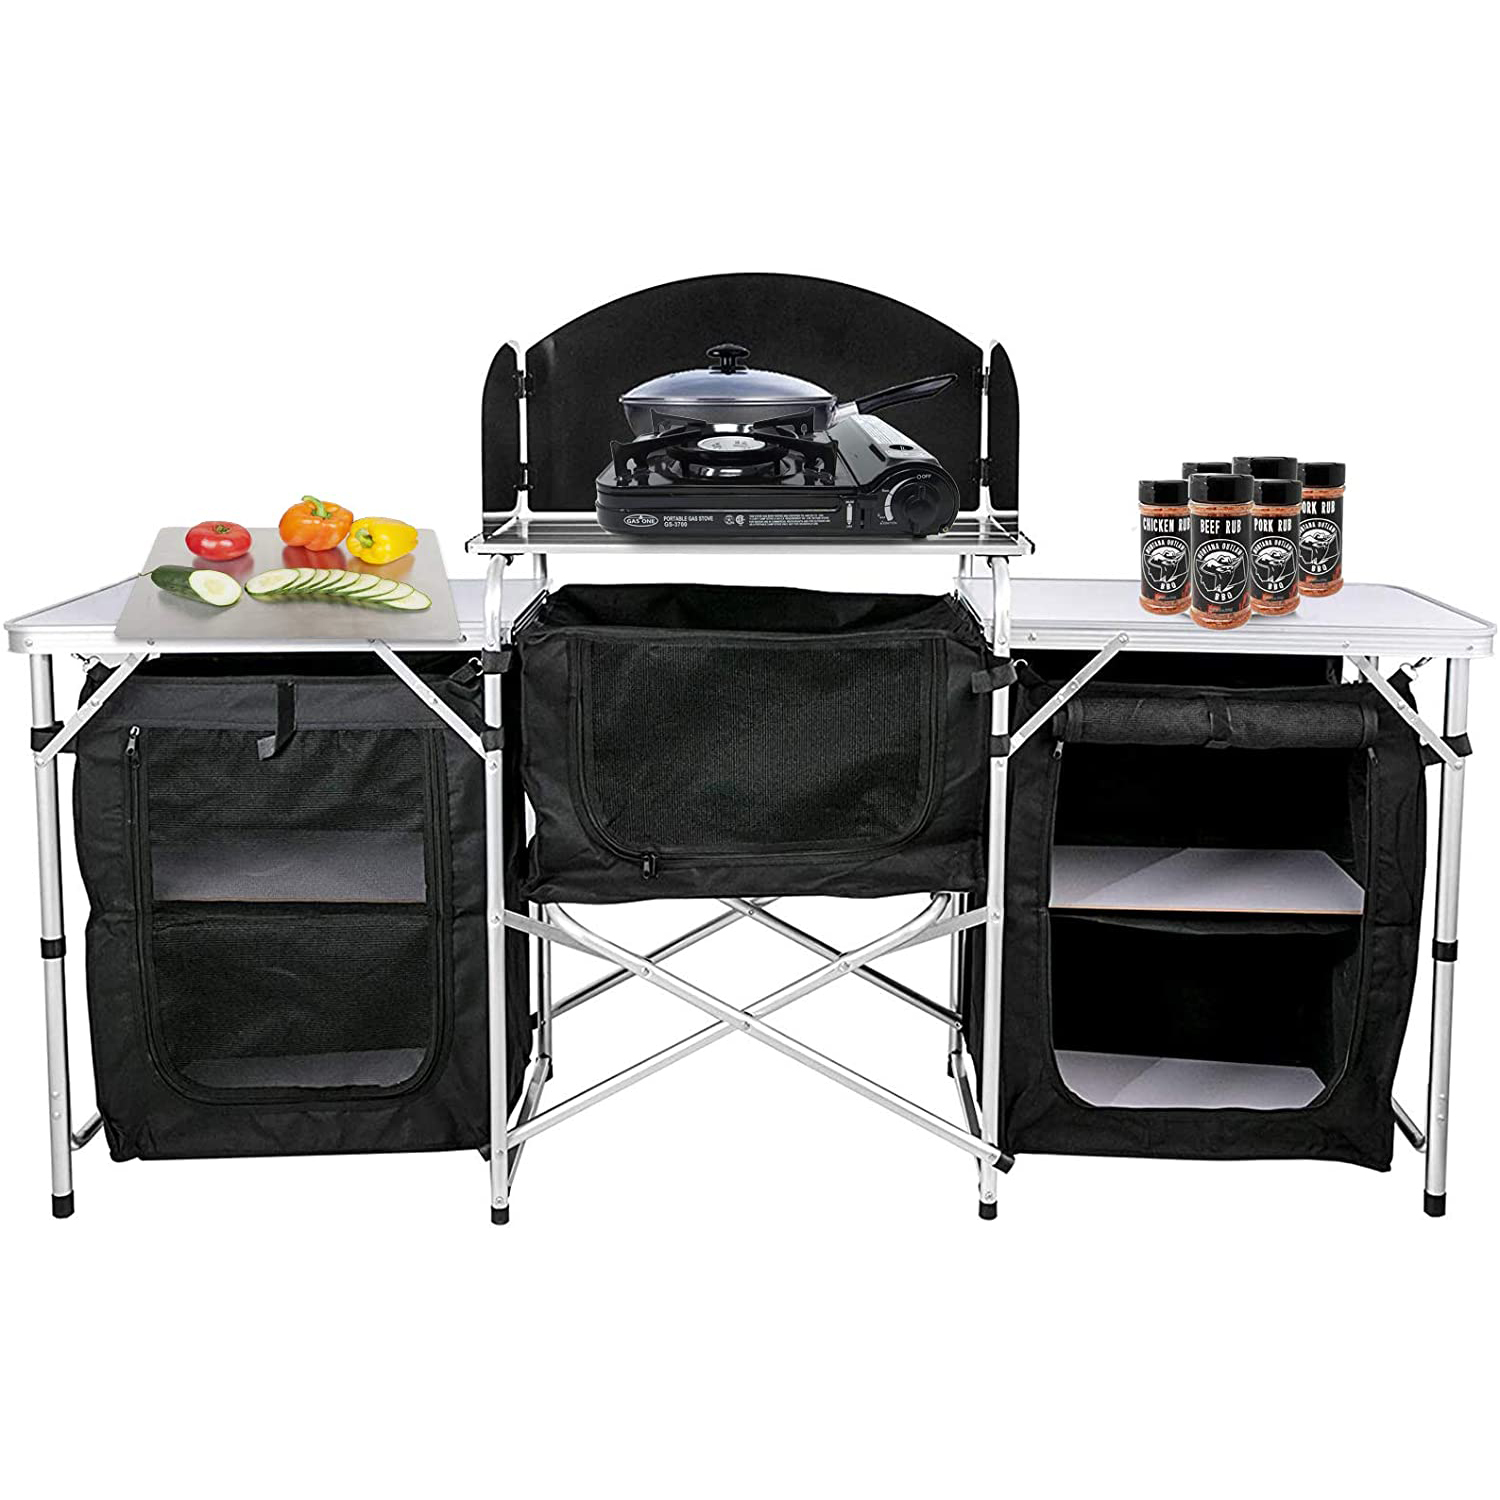 Portable Camping Cupboard Table Like Happybuy & Cabela's